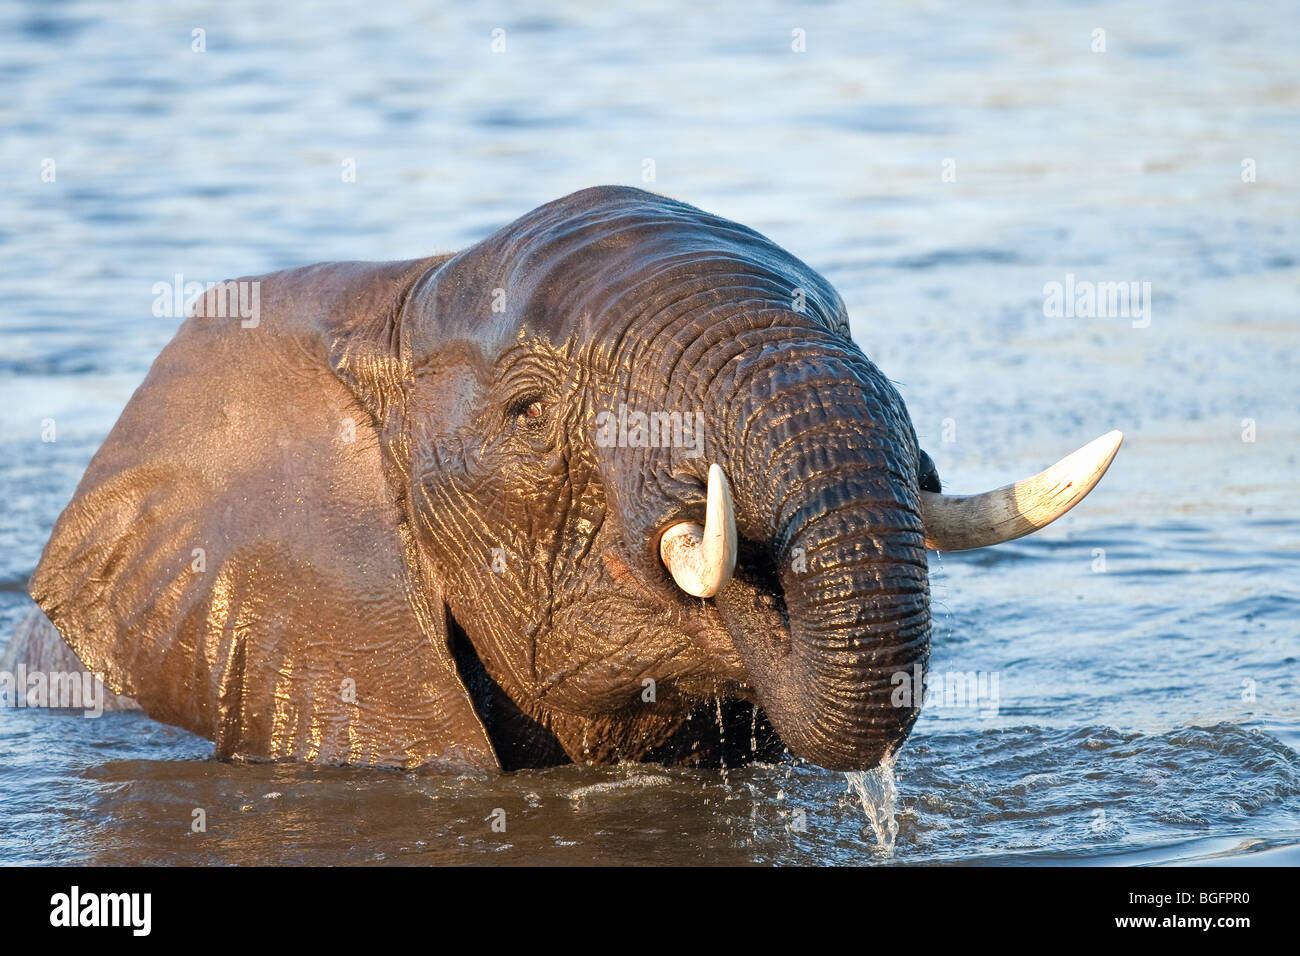 Elephant playing in water Stock Photo